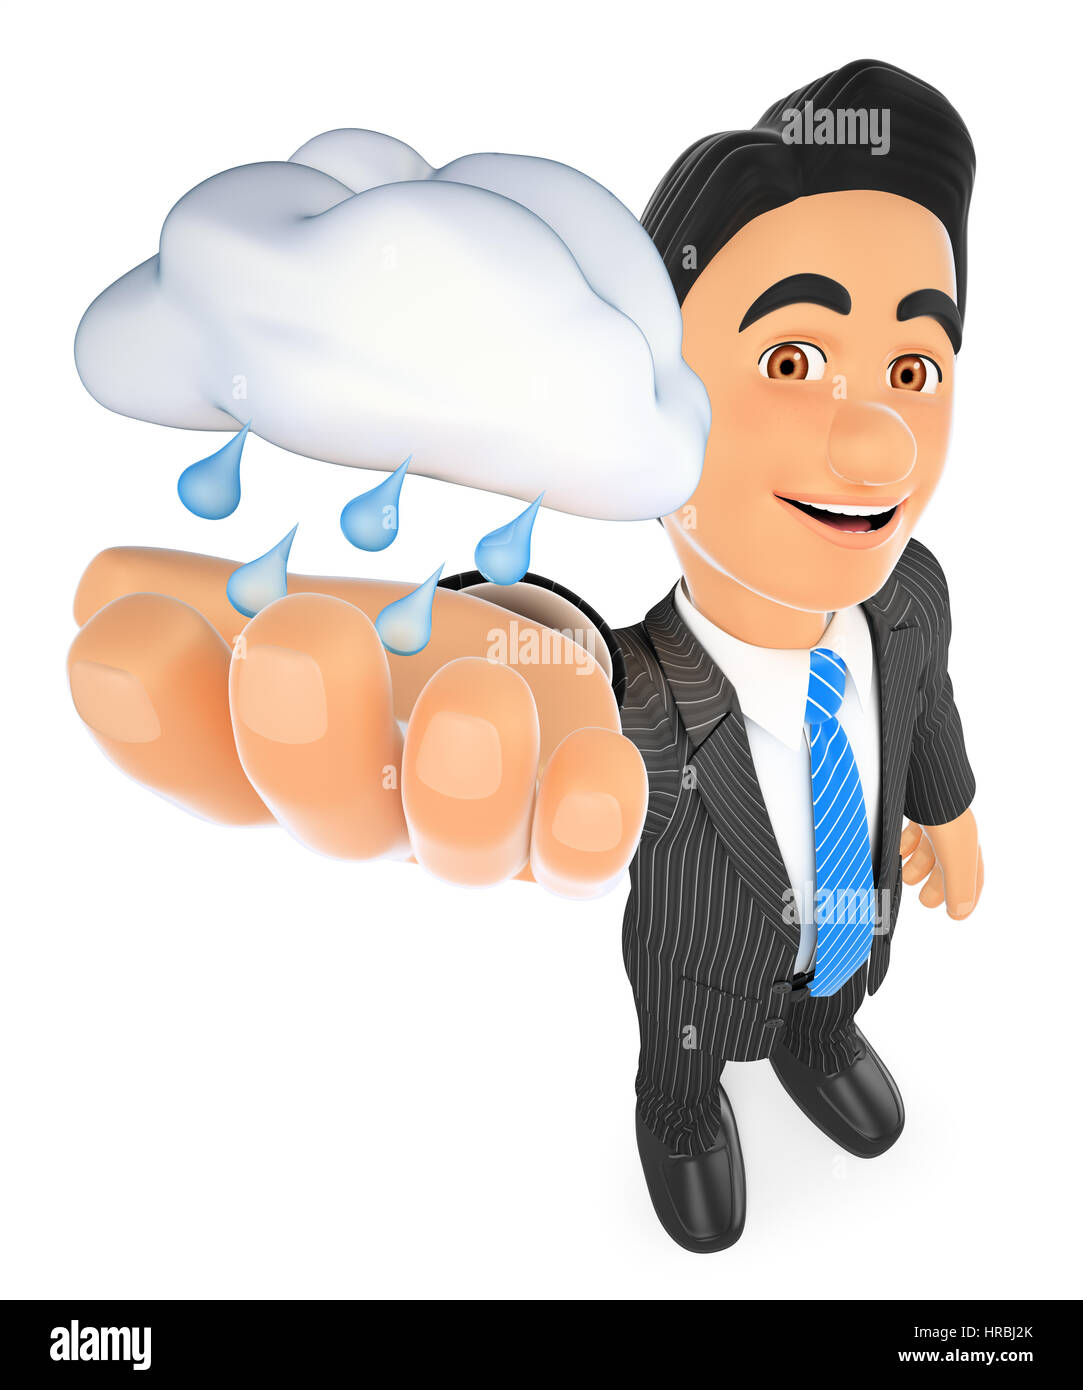 434,497 Rainy Day Images, Stock Photos, 3D objects, & Vectors